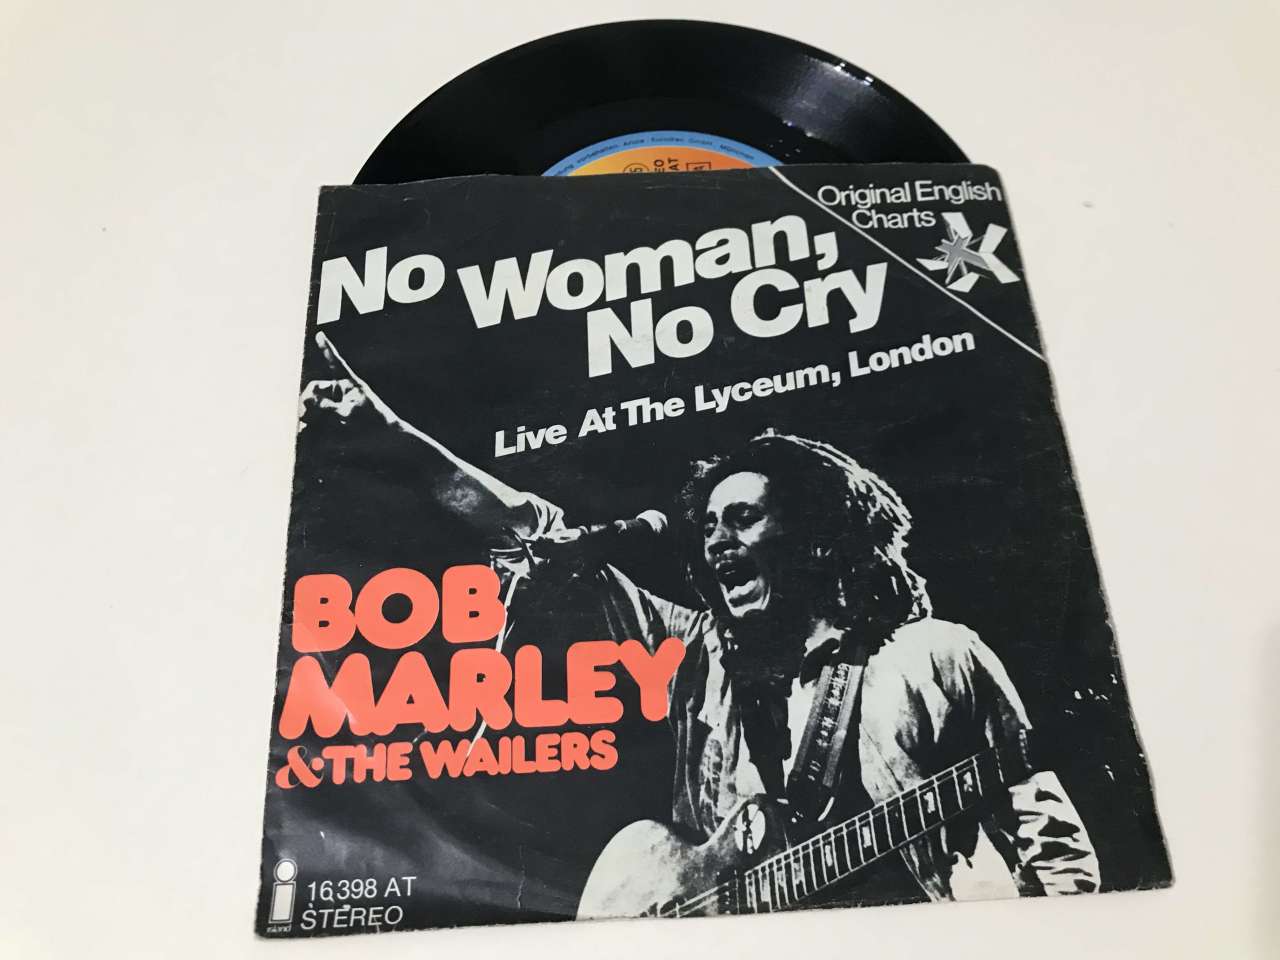 Bob Marley & The Wailers – No Woman, No Cry (Live At The Lyceum, London)